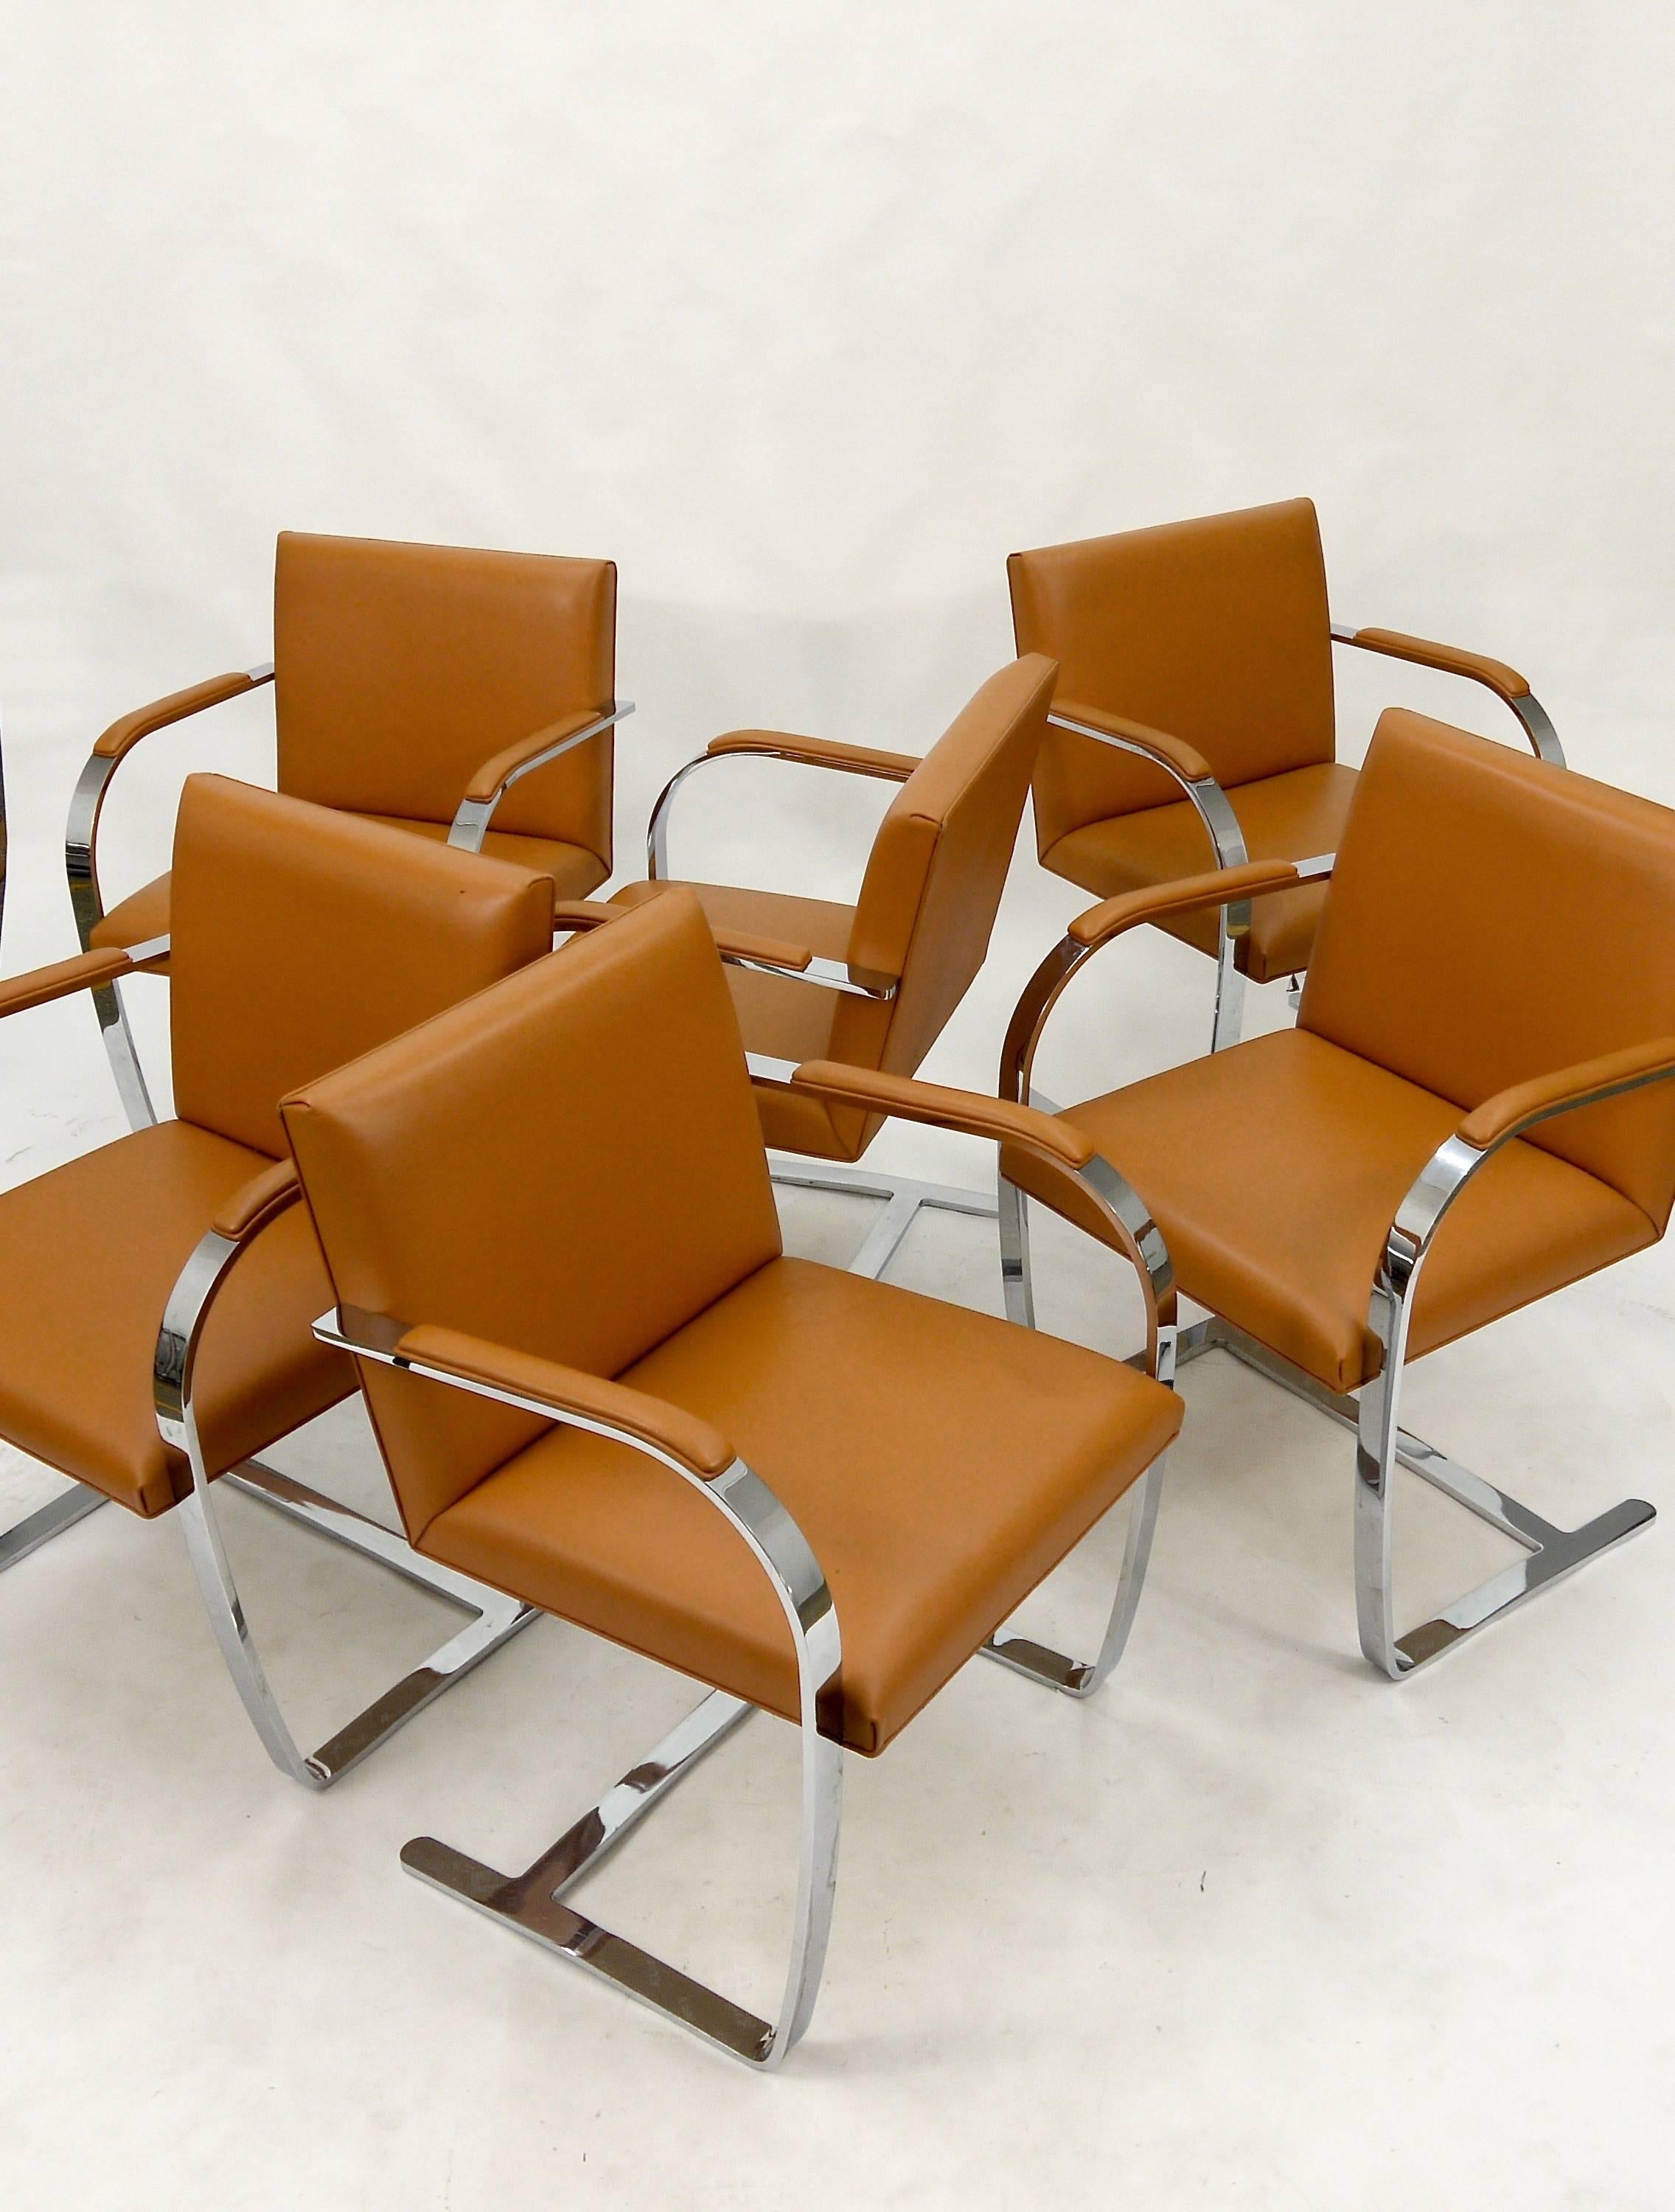 American Six Cognac Brno Leather Chairs by Ludwig Mies van der Rohe, Knoll